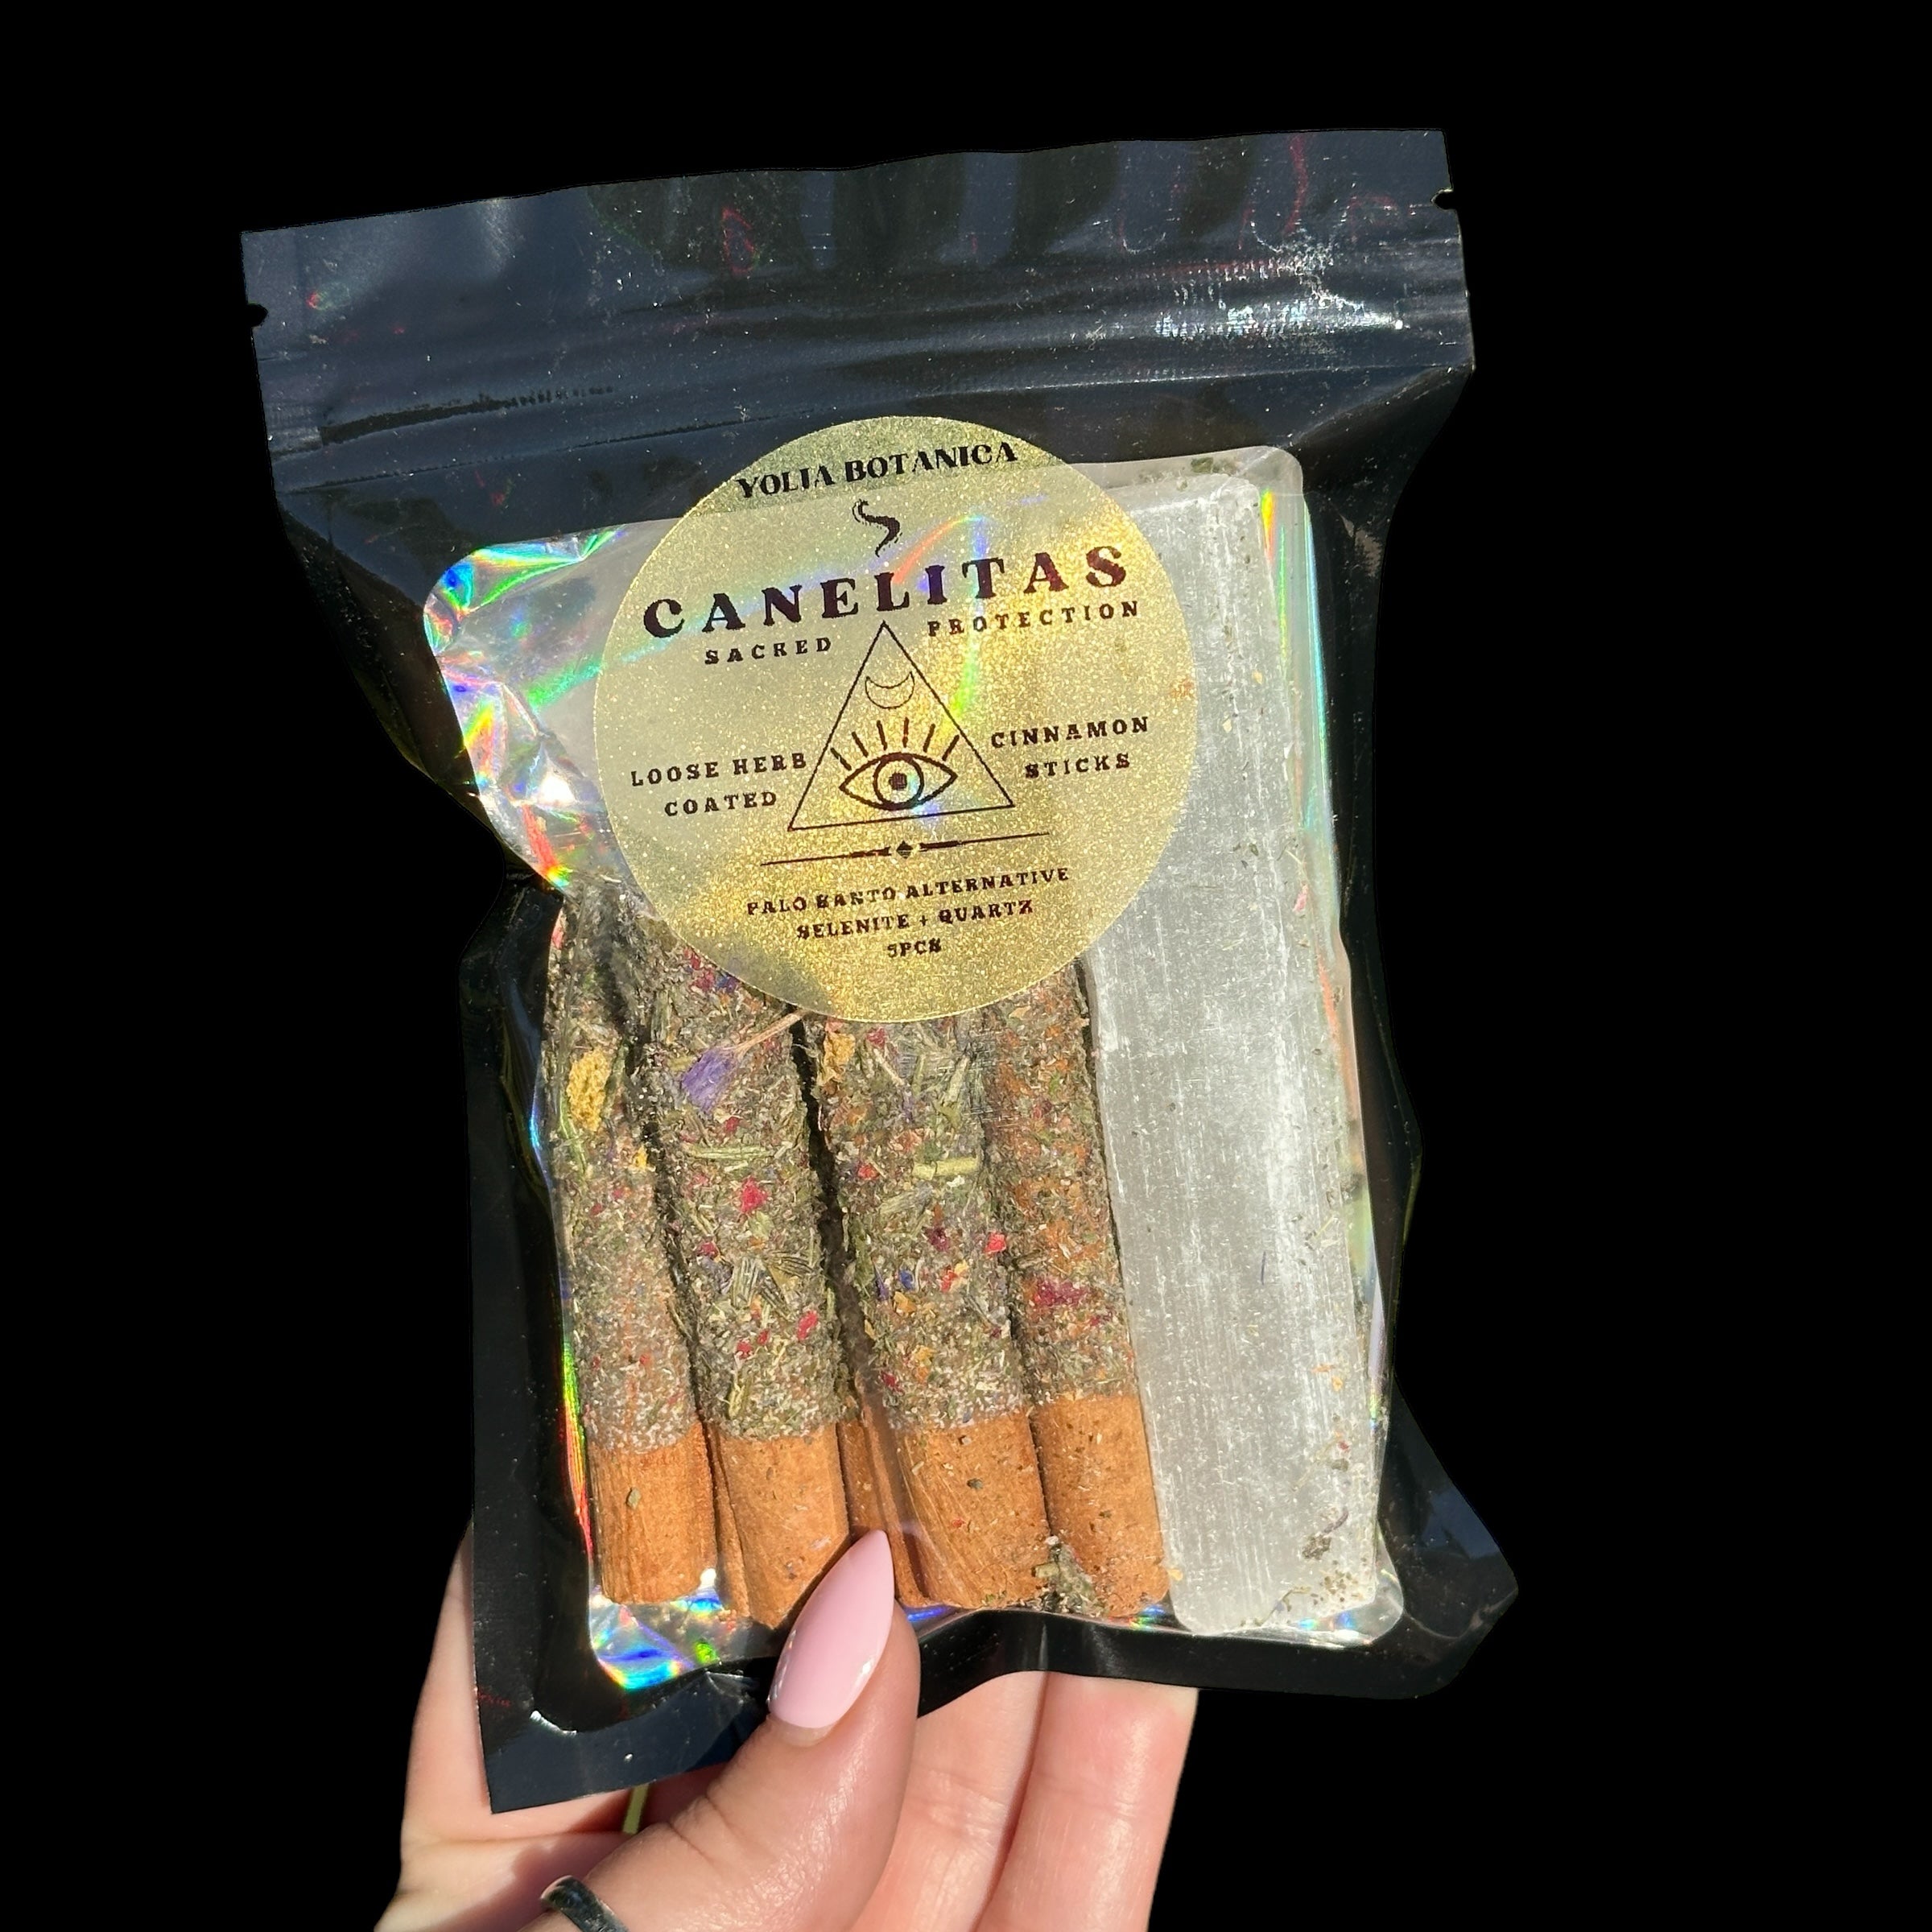 Canelitas Cleansing Wands for Sacred Protection | 5 Sticks